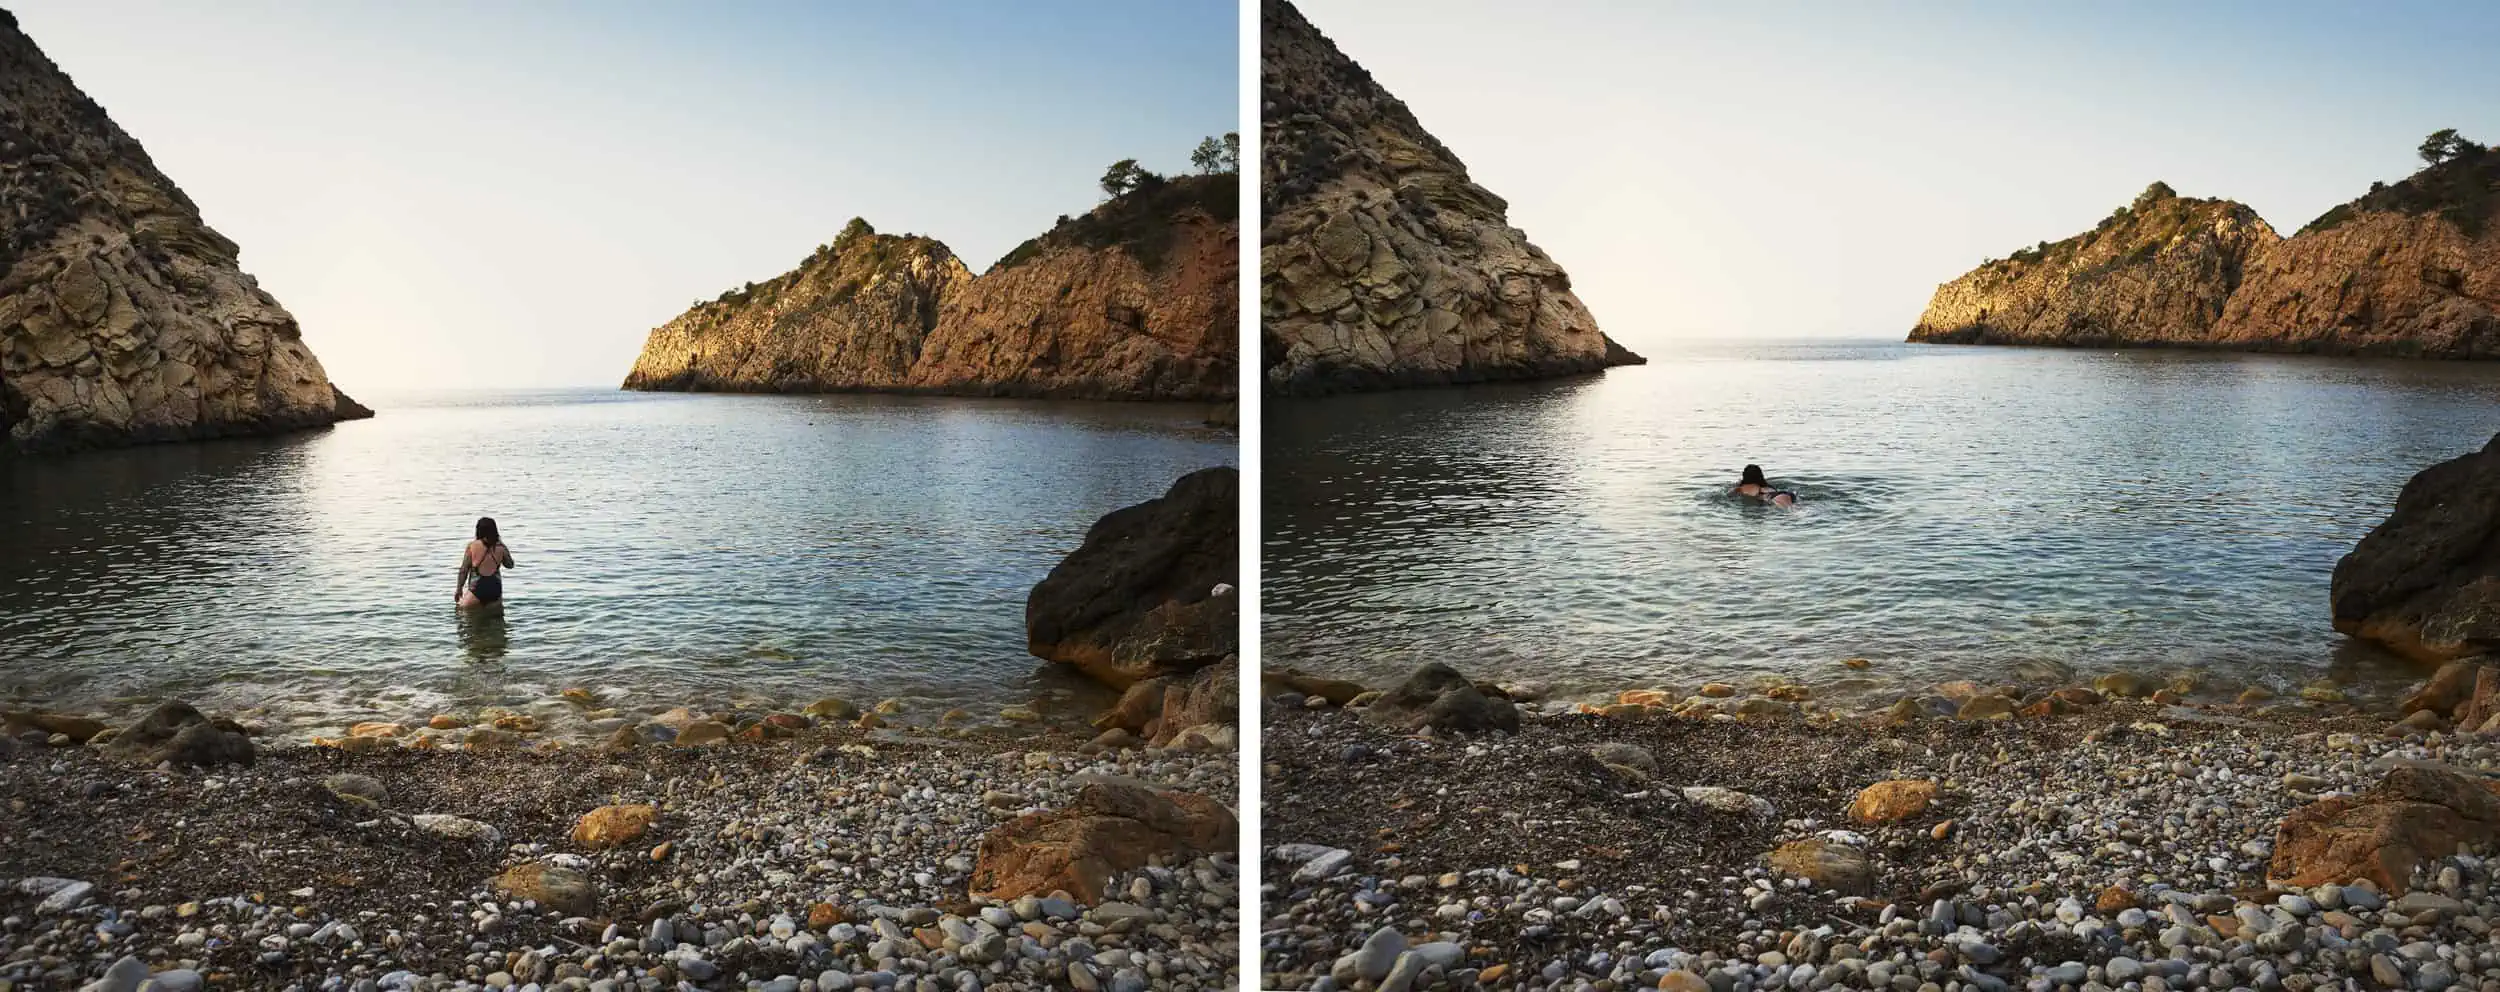 Ibiza: In Search of One Thing and Finding Another - Our guide to the best beaches and open water swimming on the island - Image Asset